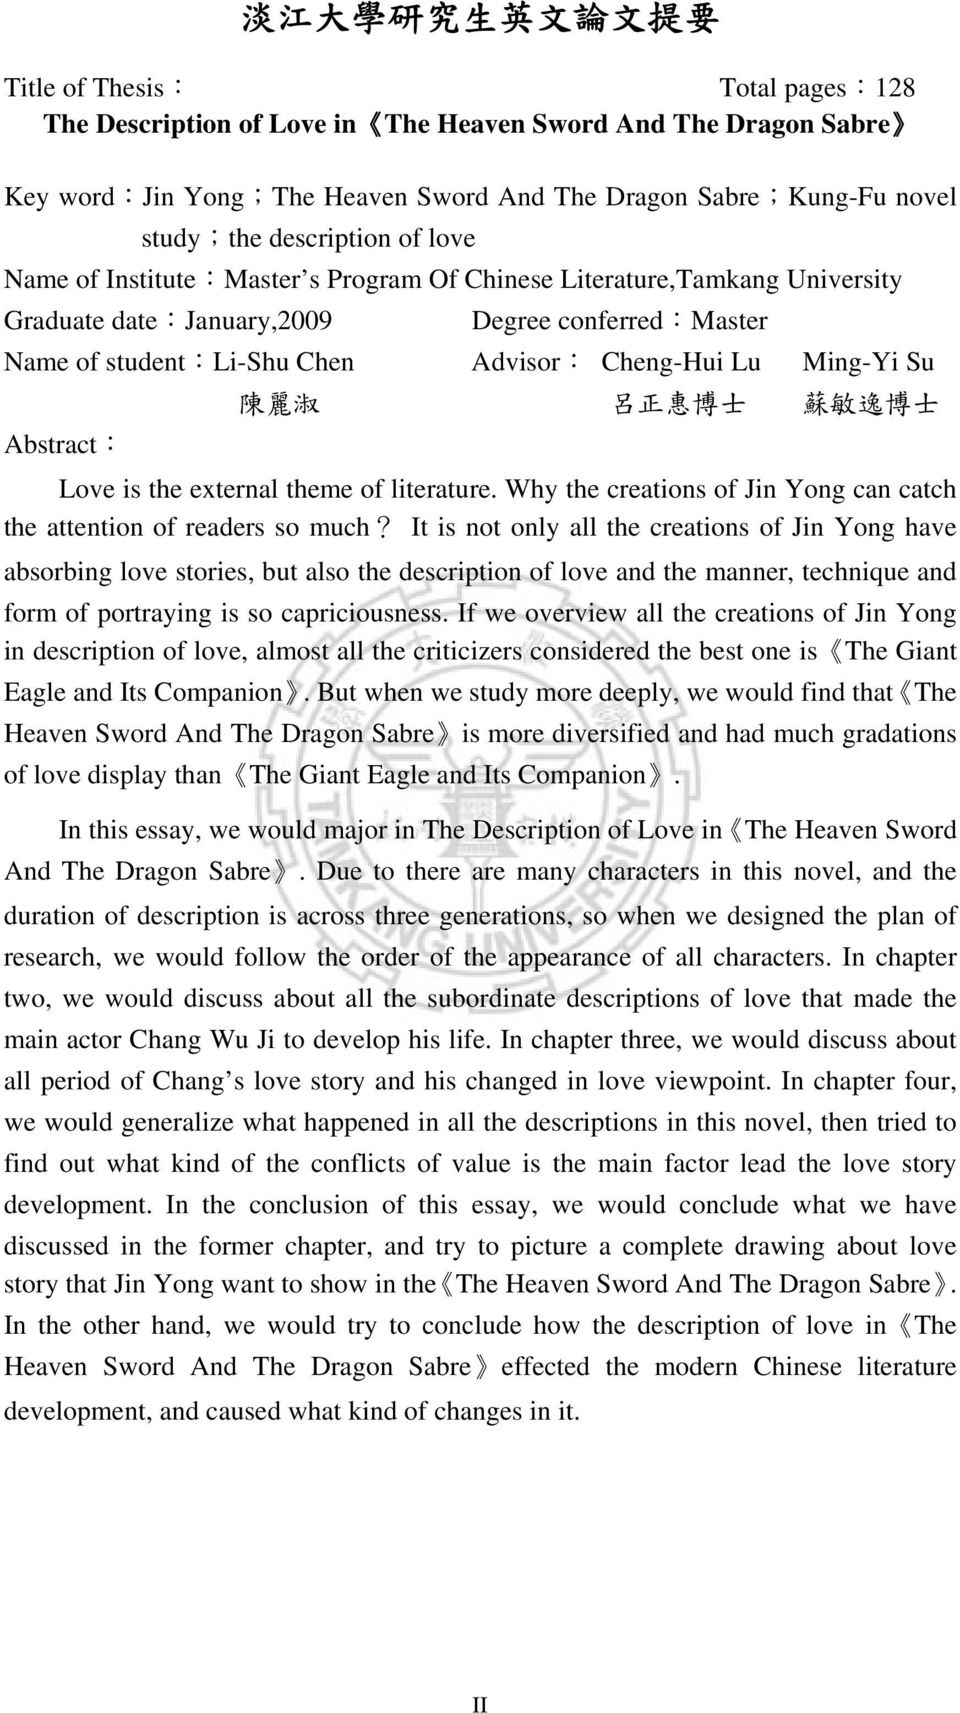 Cheng-Hui Lu Ming-Yi Su 陳 麗 淑 呂 正 惠 博 士 蘇 敏 逸 博 士 Abstract: Love is the external theme of literature. Why the creations of Jin Yong can catch the attention of readers so much?